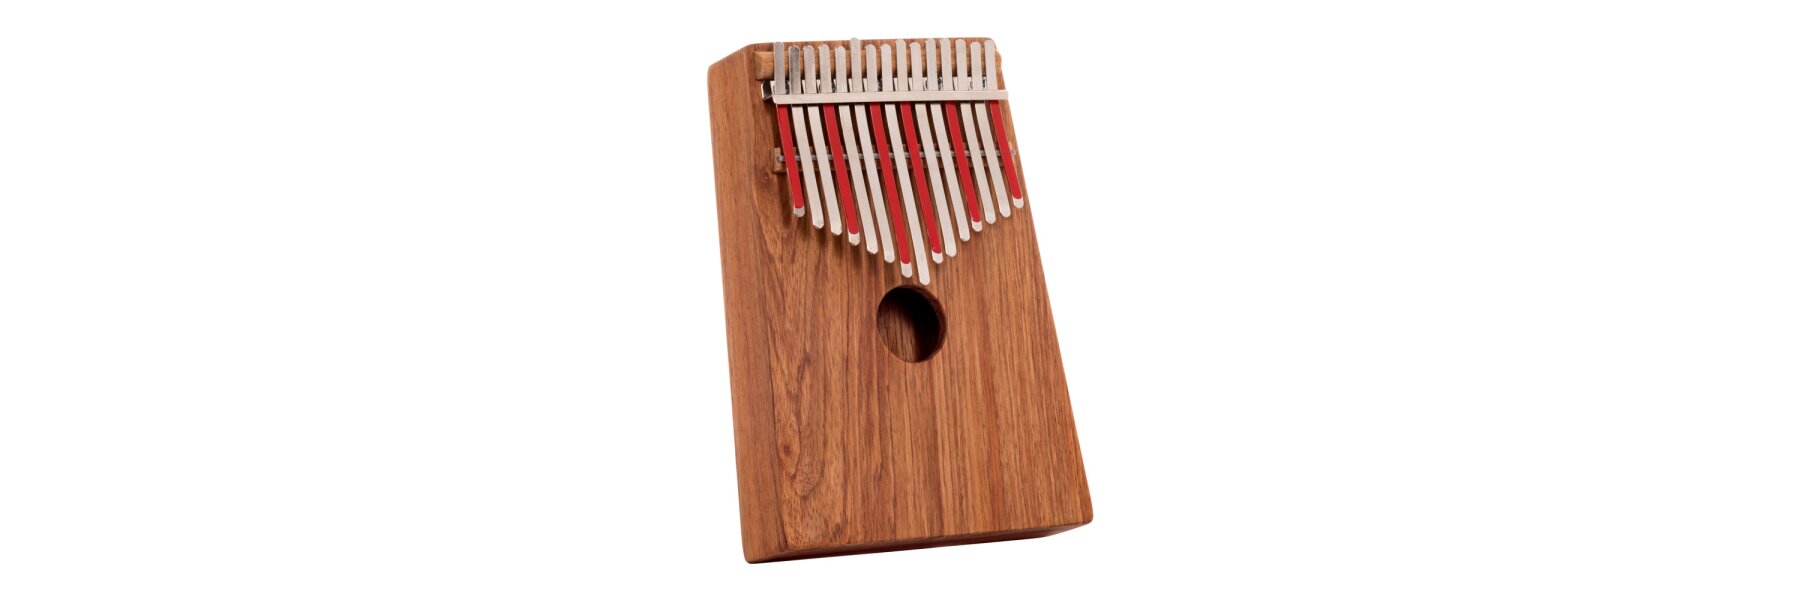 Hugh Tracey Treble Kalimba w/Pickup – House of Musical Traditions